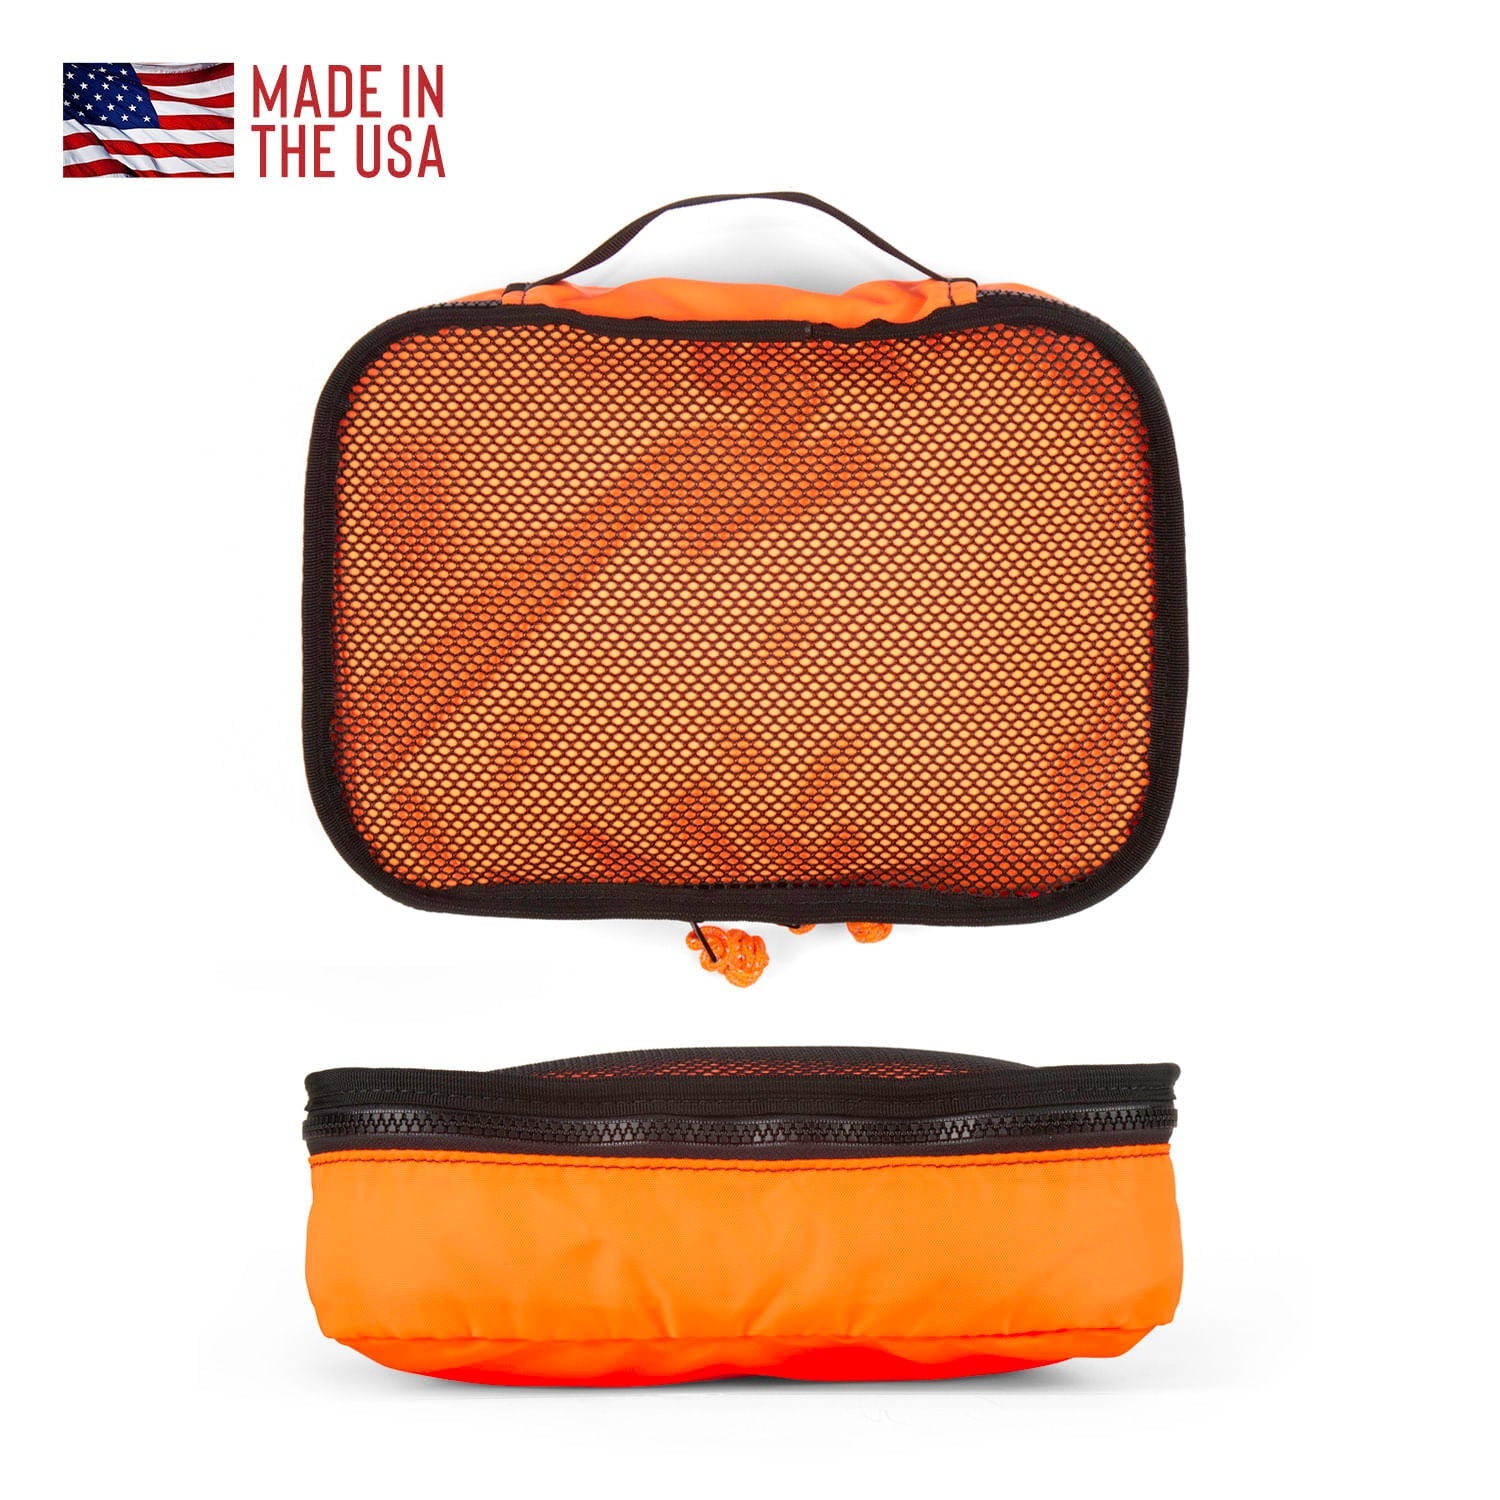 Packing cube with mesh top. Dimensions Ten inches x seven inches x two inches depth. 